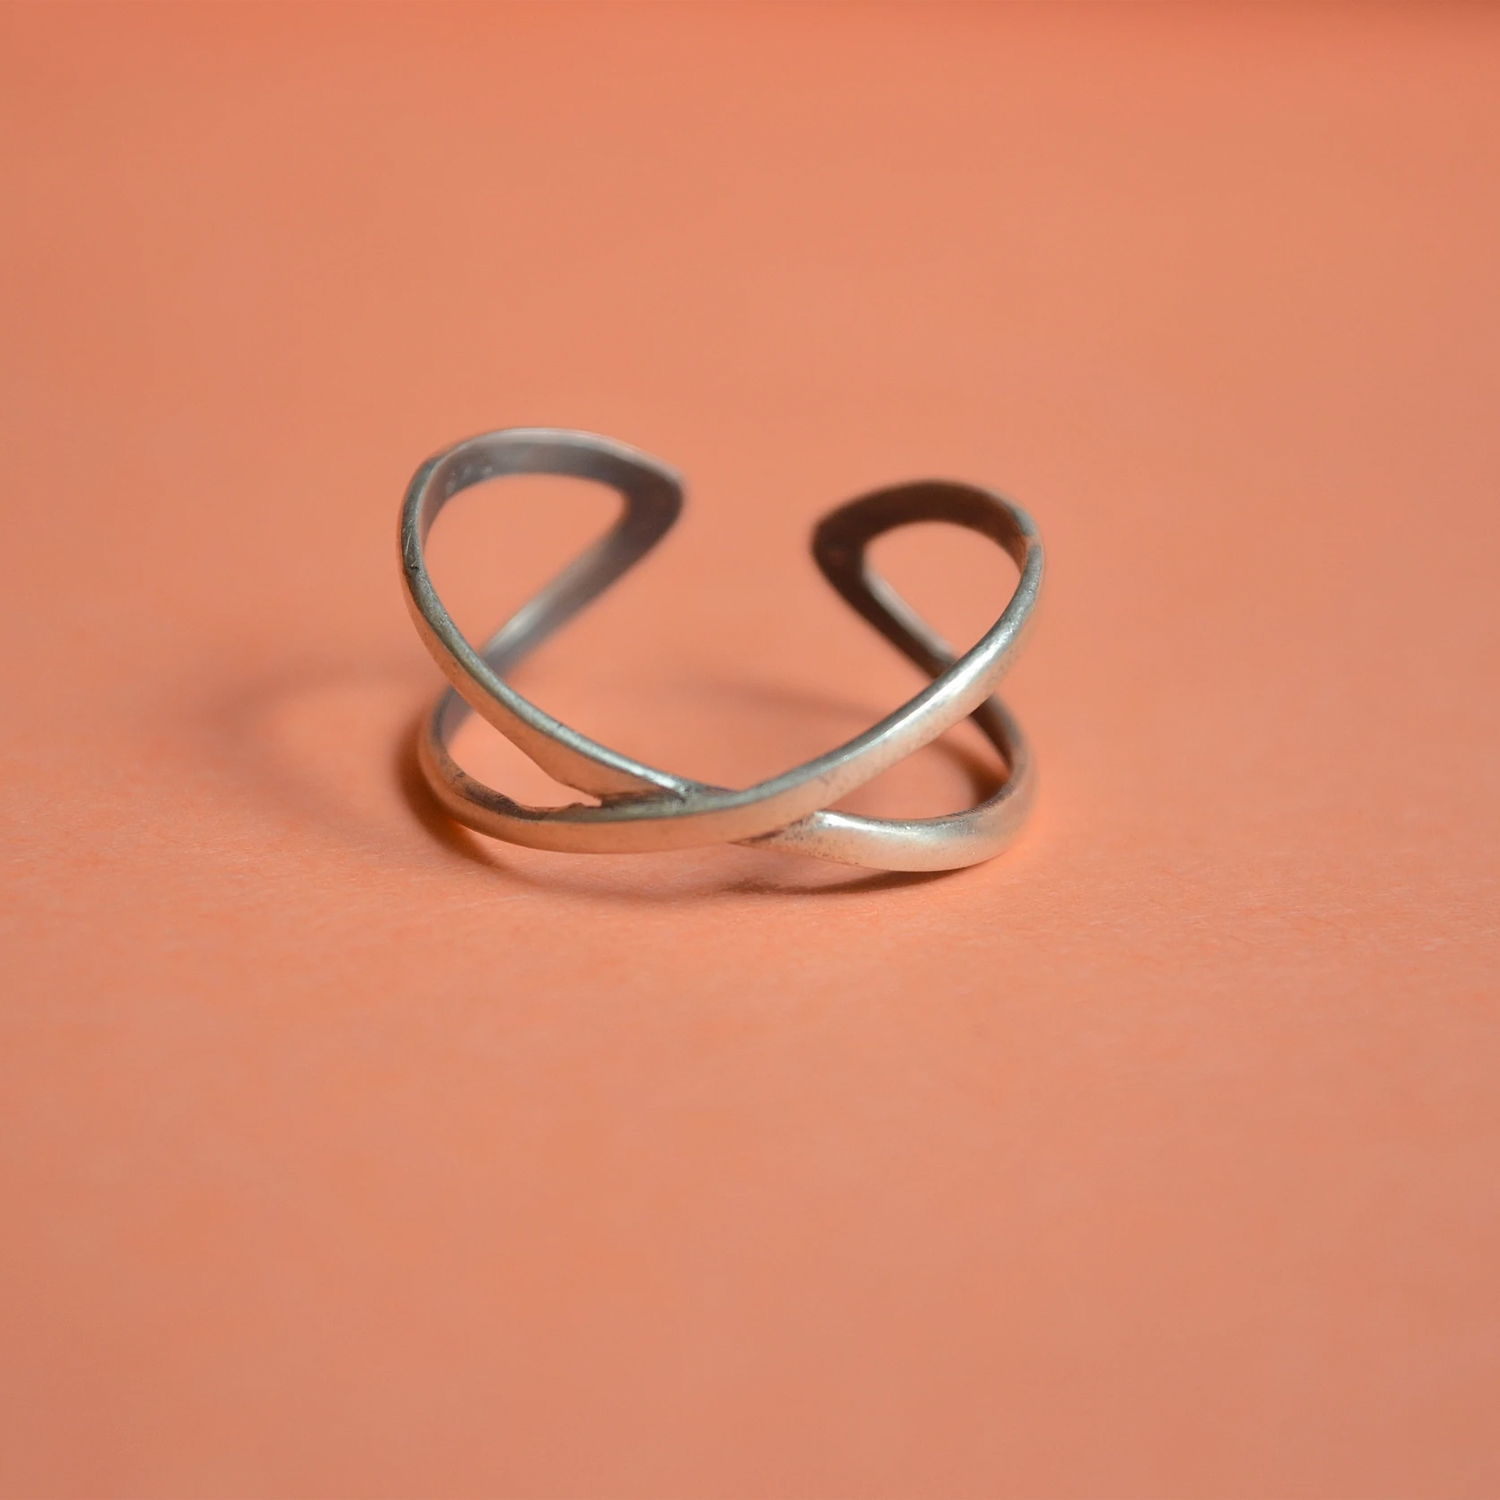 Buy Silver Ring, Ring Set, Plain Silver, Ring for Women, Sterling Silver,  Braided Ring, Silver Band, Womens Jewelry, Gift for Her, Gold Jewelry  Online in India - Etsy